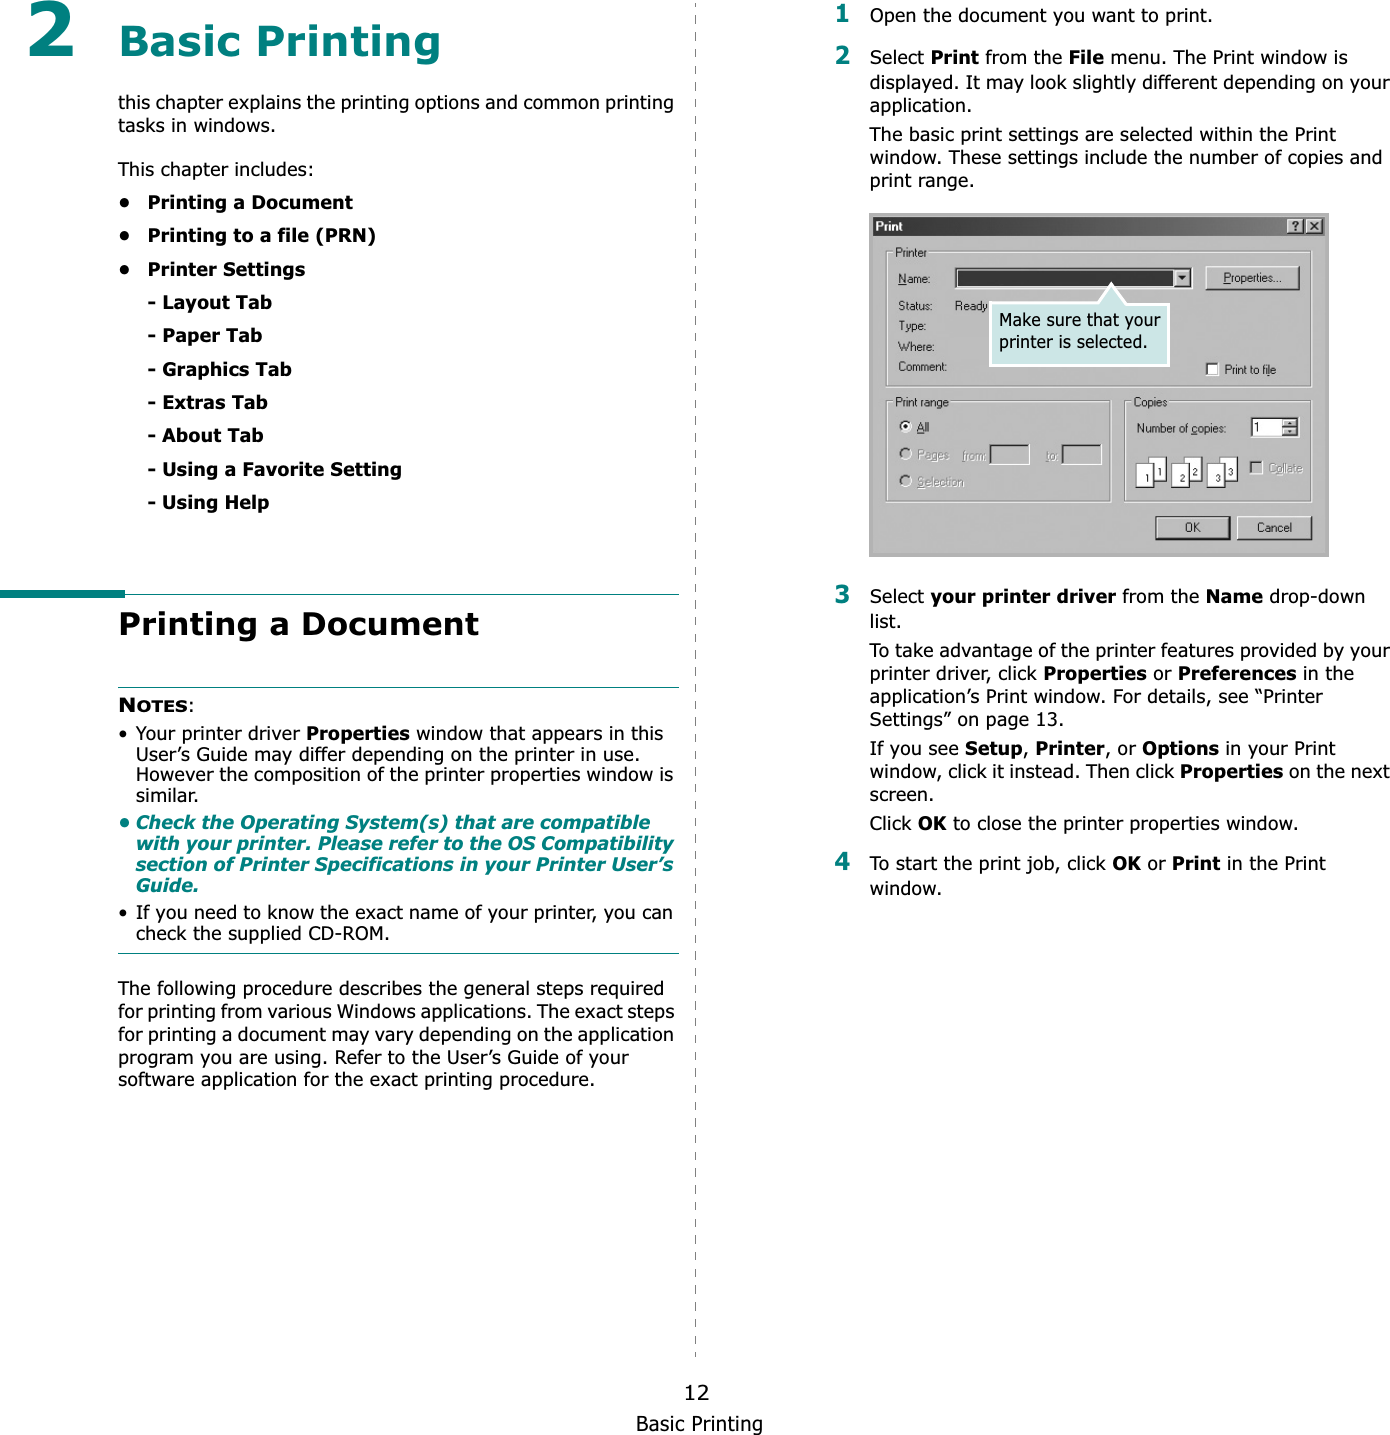 Basic Printing122Basic Printing this chapter explains the printing options and common printing tasks in windows. This chapter includes:• Printing a Document• Printing to a file (PRN)•Printer Settings- Layout Tab- Paper Tab- Graphics Tab- Extras Tab- About Tab- Using a Favorite Setting- Using HelpPrinting a DocumentNOTES:• Your printer driver Properties window that appears in this User’s Guide may differ depending on the printer in use. However the composition of the printer properties window is similar.• Check the Operating System(s) that are compatible with your printer. Please refer to the OS Compatibility section of Printer Specifications in your Printer User’s Guide.• If you need to know the exact name of your printer, you can check the supplied CD-ROM.The following procedure describes the general steps required for printing from various Windows applications. The exact steps for printing a document may vary depending on the application program you are using. Refer to the User’s Guide of your software application for the exact printing procedure.1Open the document you want to print.2Select Print from the File menu. The Print window is displayed. It may look slightly different depending on your application. The basic print settings are selected within the Print window. These settings include the number of copies and print range.3Select your printer driver from the Name drop-down list.To take advantage of the printer features provided by your printer driver, click Properties or Preferences in the application’s Print window. For details, see “Printer Settings” on page 13.If you see Setup,Printer, or Options in your Print window, click it instead. Then click Properties on the next screen.Click OK to close the printer properties window.4To start the print job, click OK or Print in the Print window.Make sure that your printer is selected.